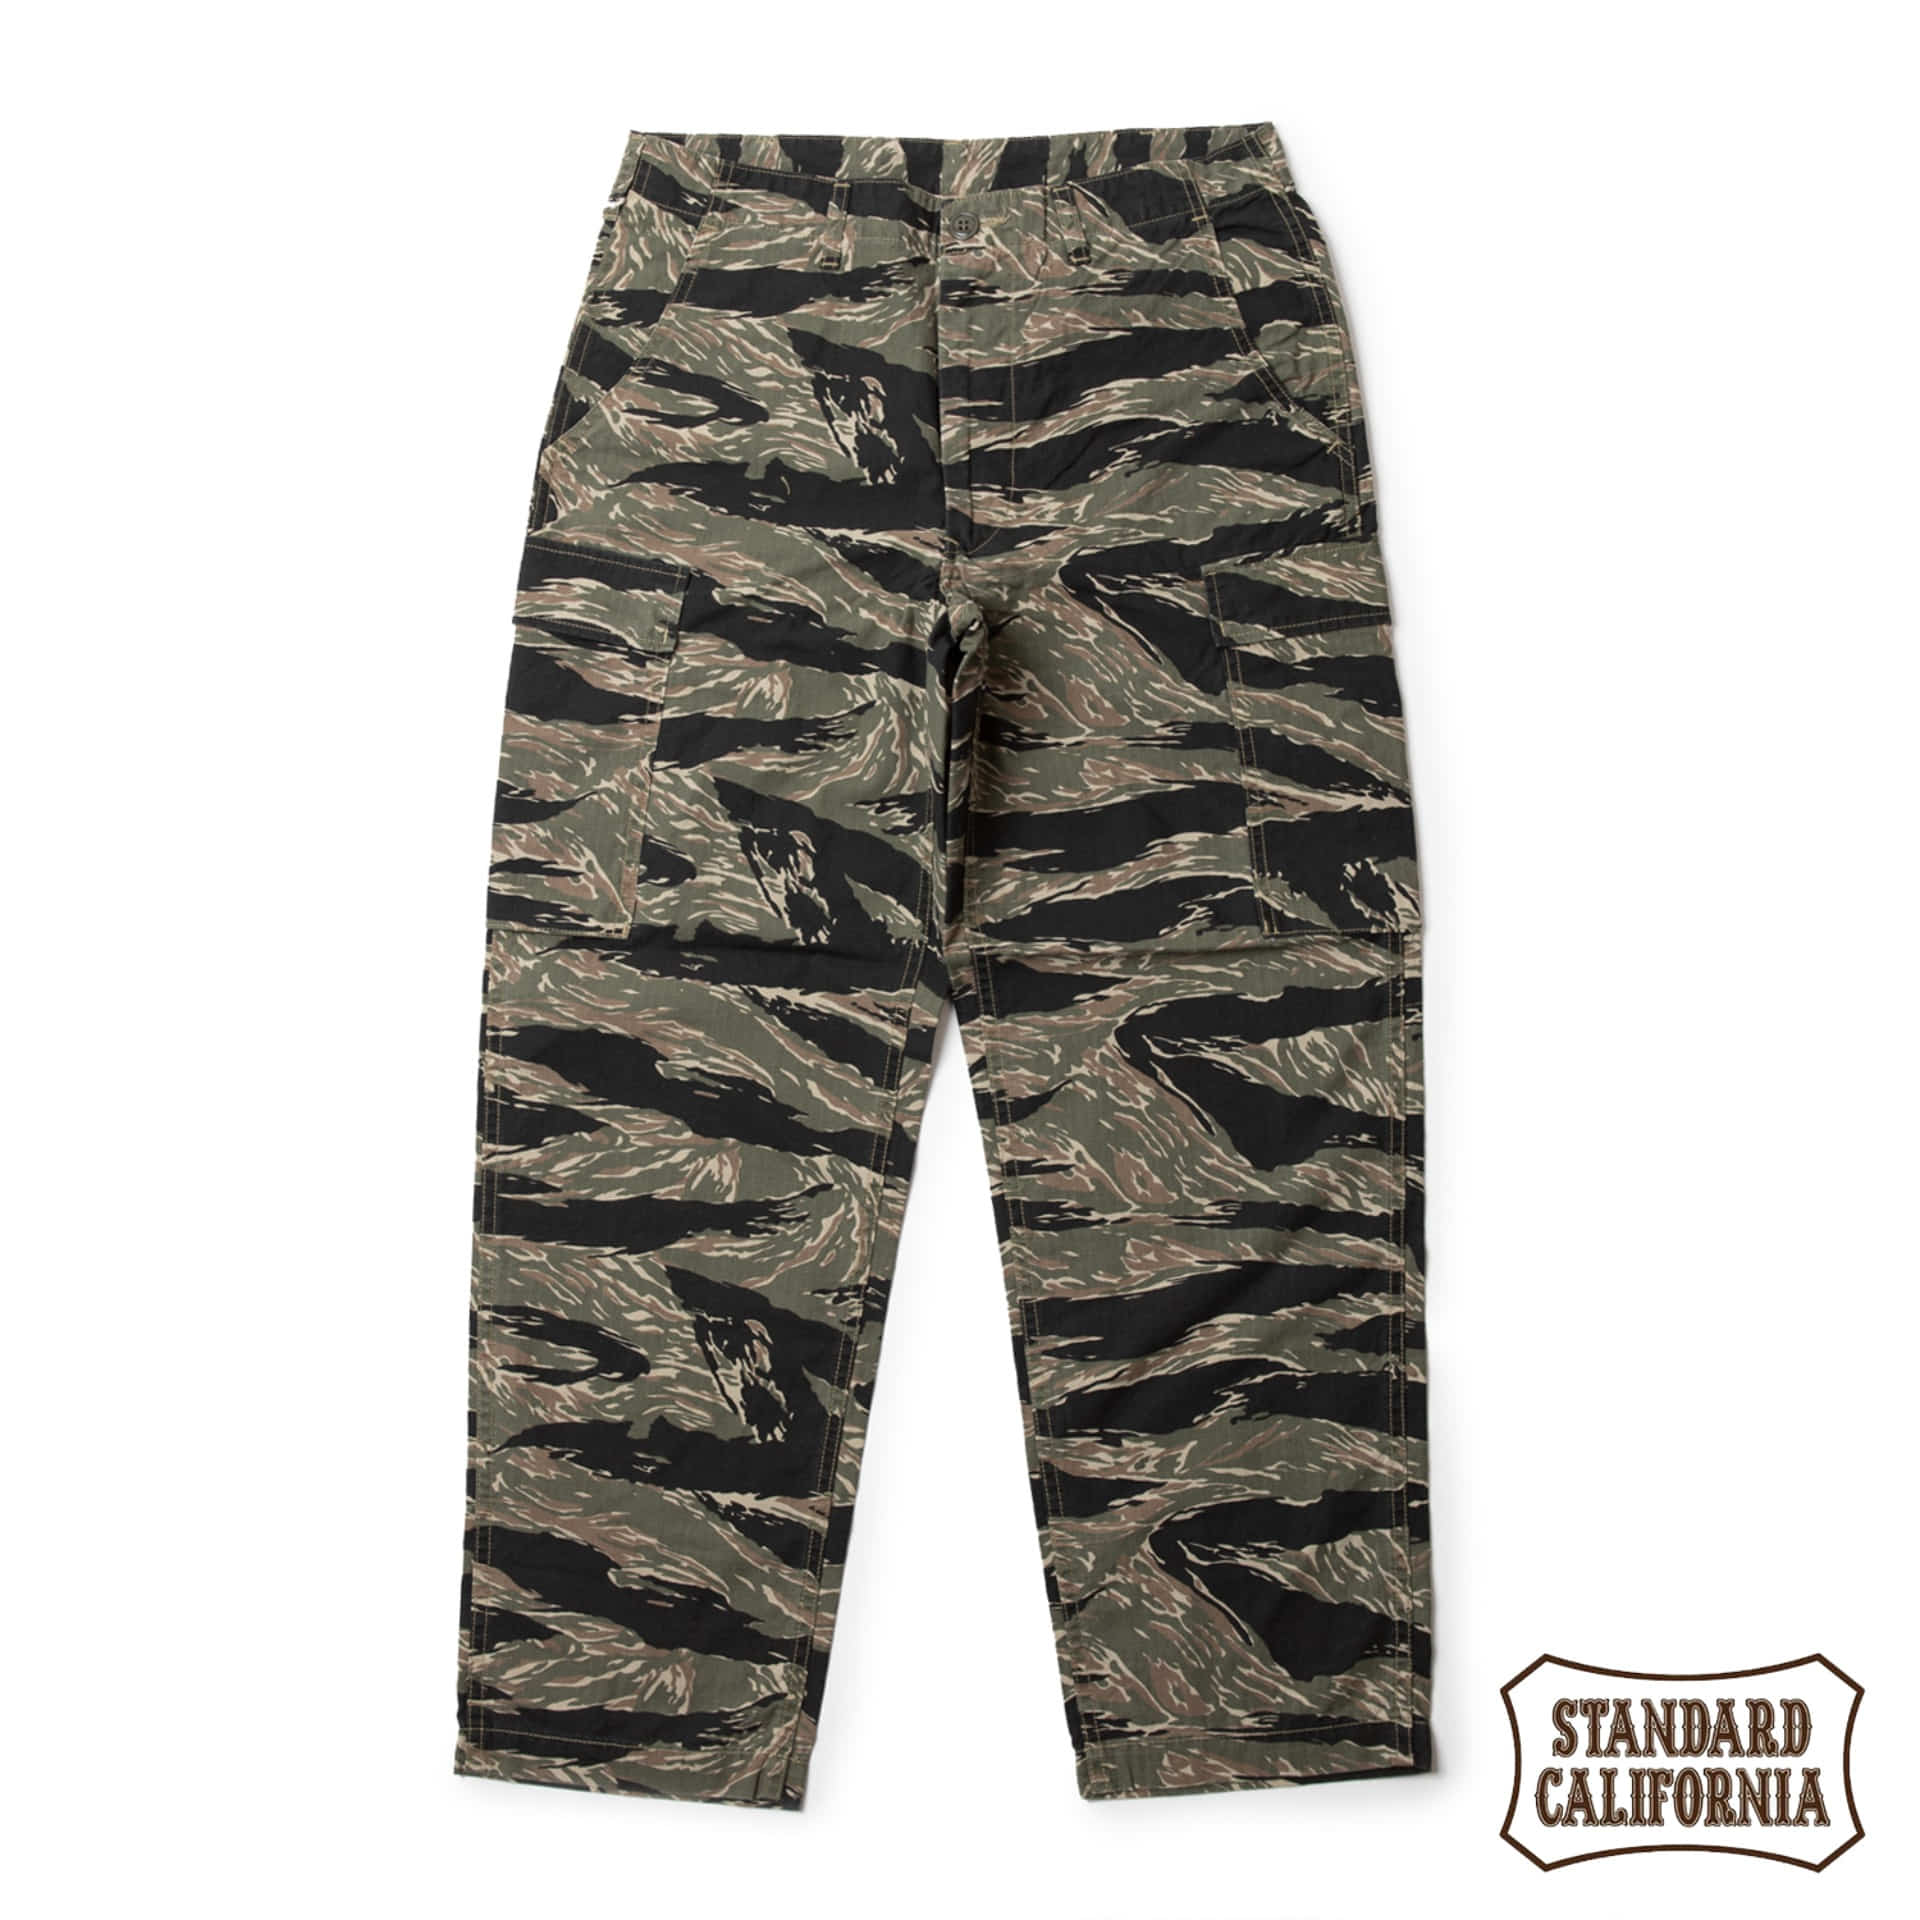 SD RIPSTOP ARMY CARGO PANTS (Camouflage)